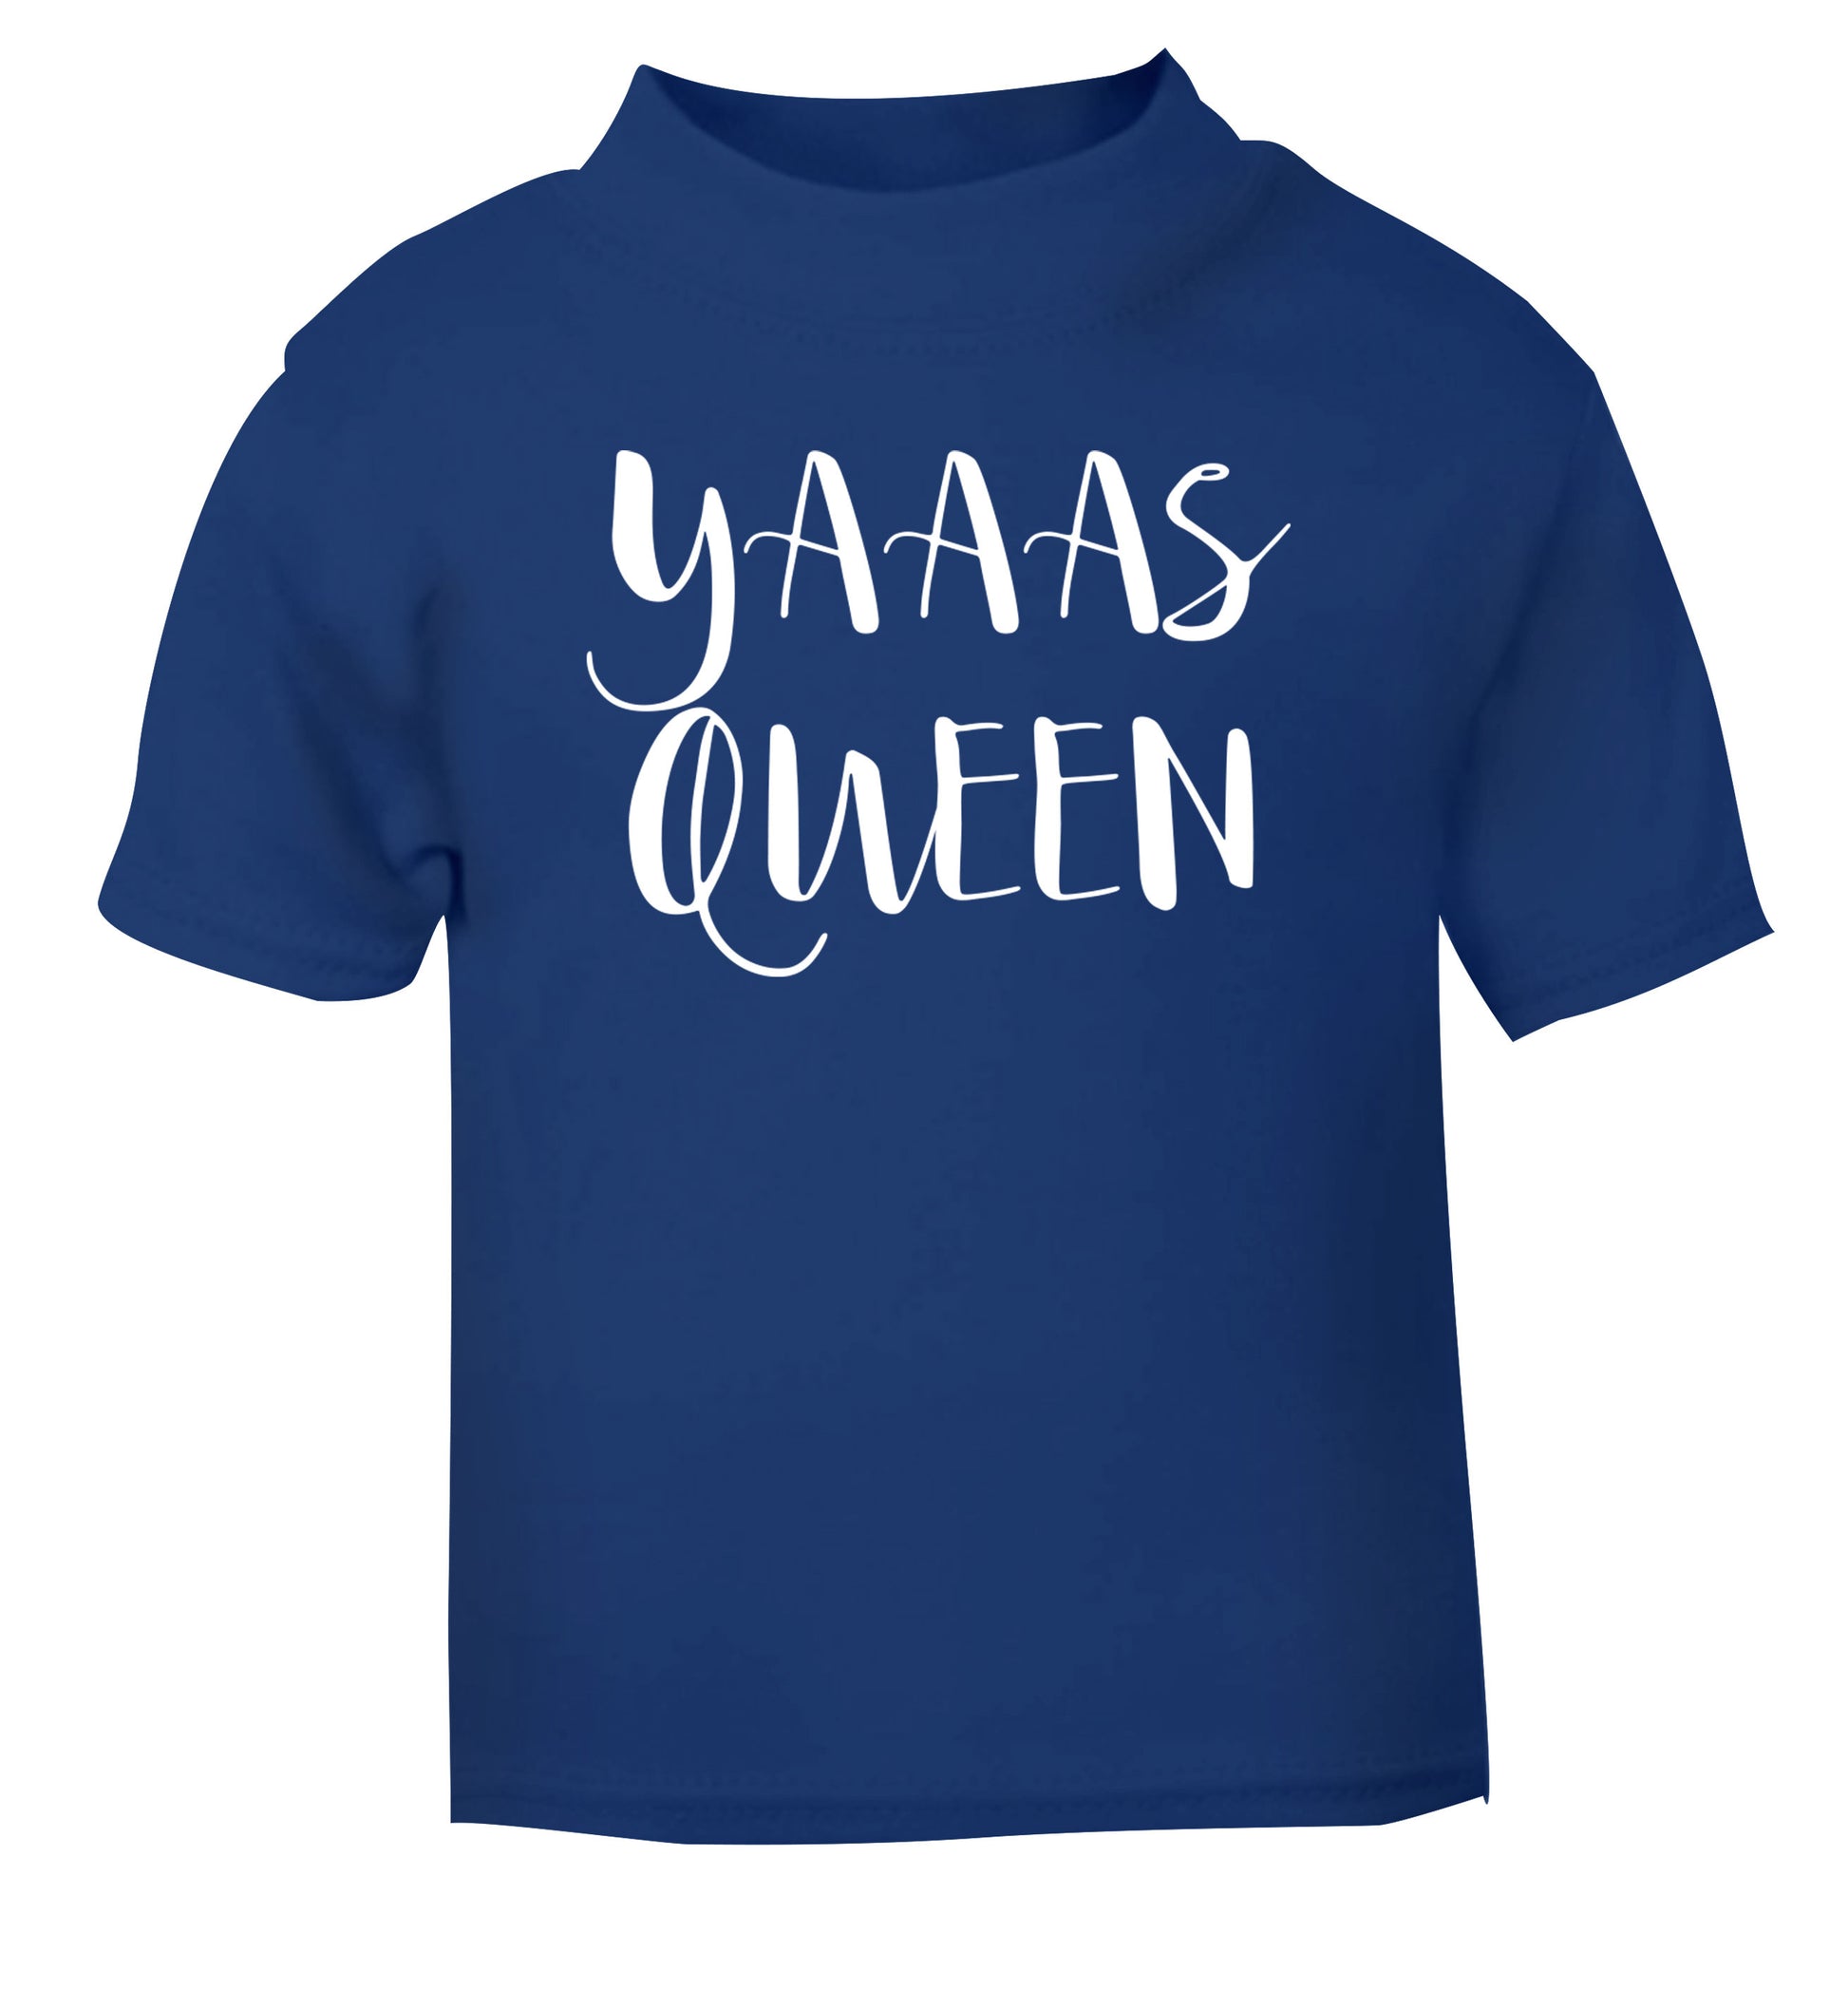 Yas Queen blue Baby Toddler Tshirt 2 Years